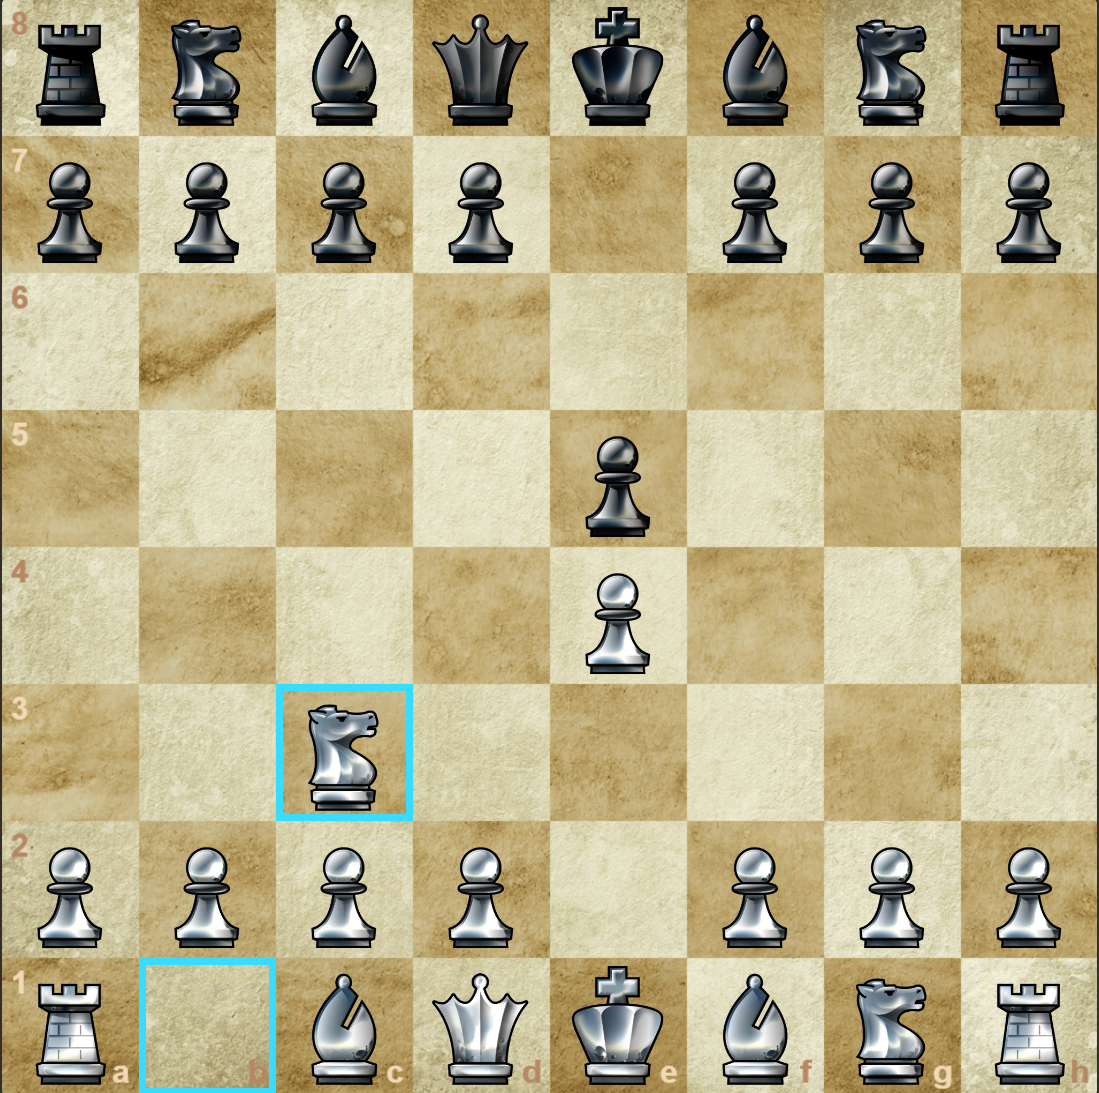 Win with the Vienna Game Chess Opening: 1.e4 e5 2. Nc3